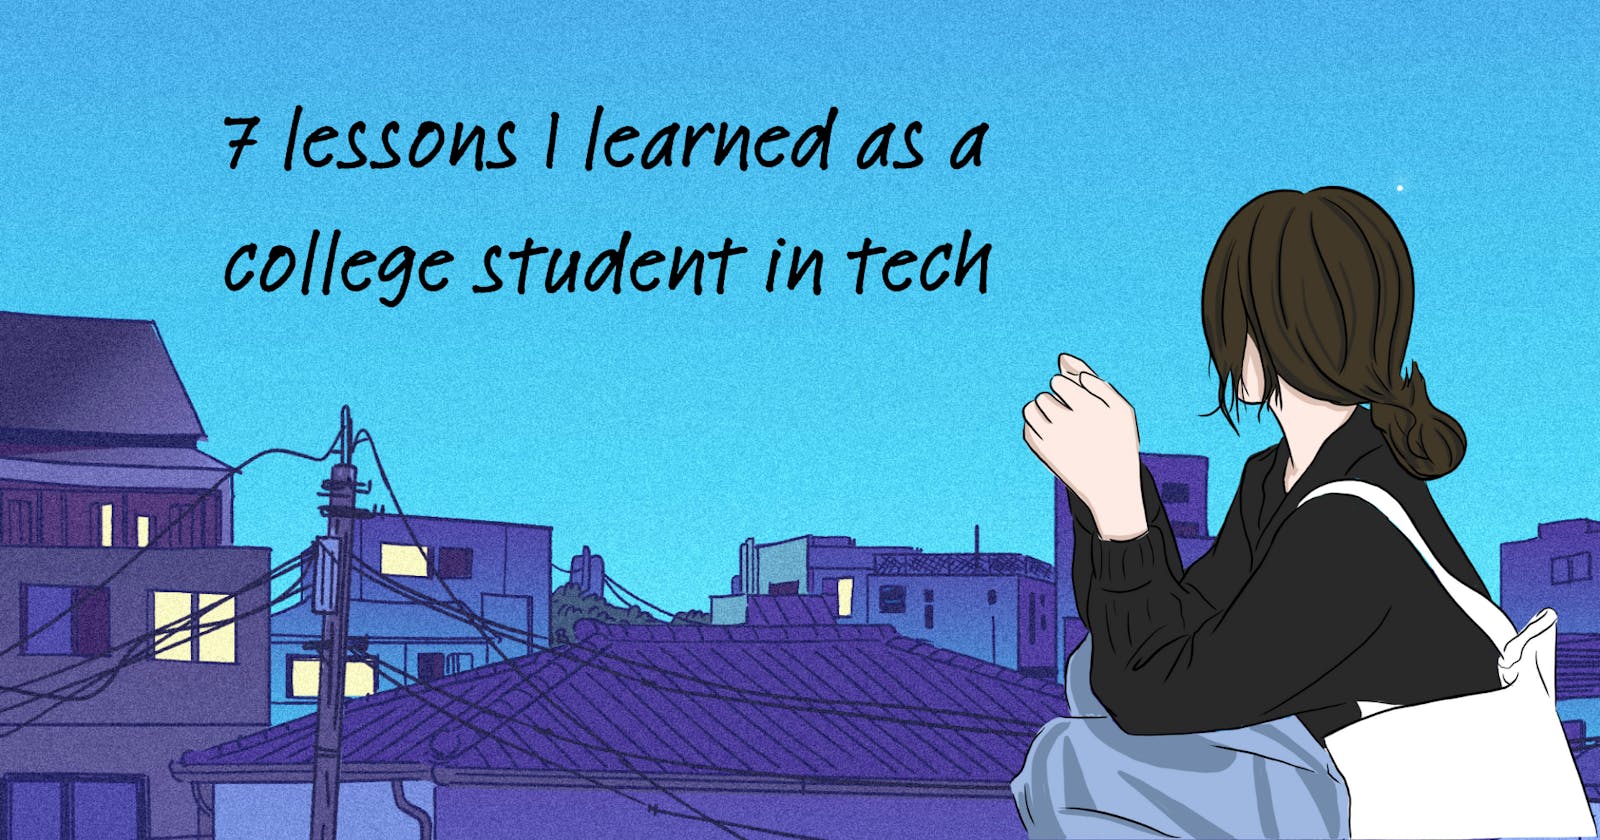 7 lessons I learned as a college student in tech